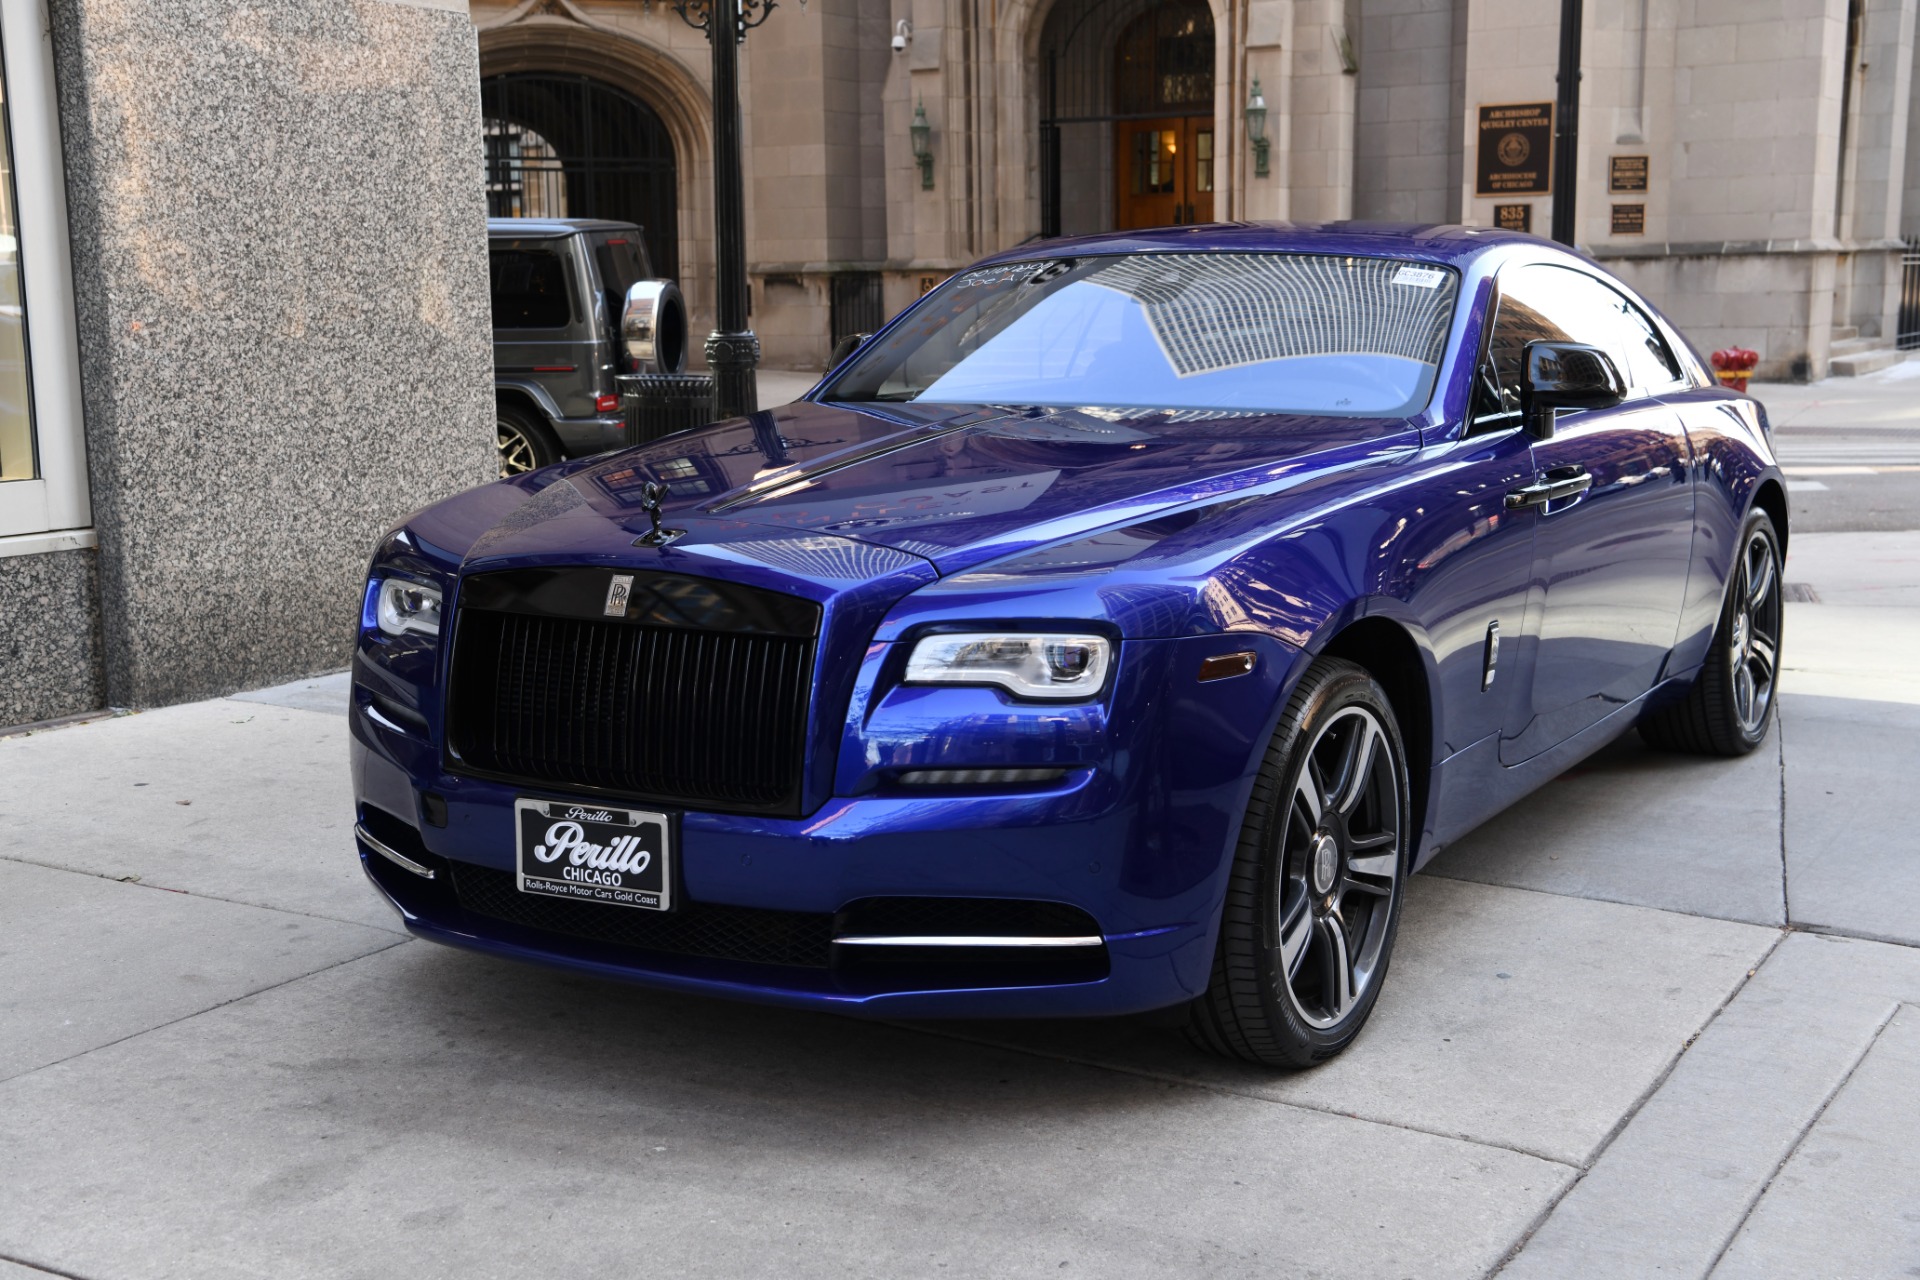 Used 2017 RollsRoyce Wraith For Sale Sold  Perfect Auto Collection  Stock HUX86850